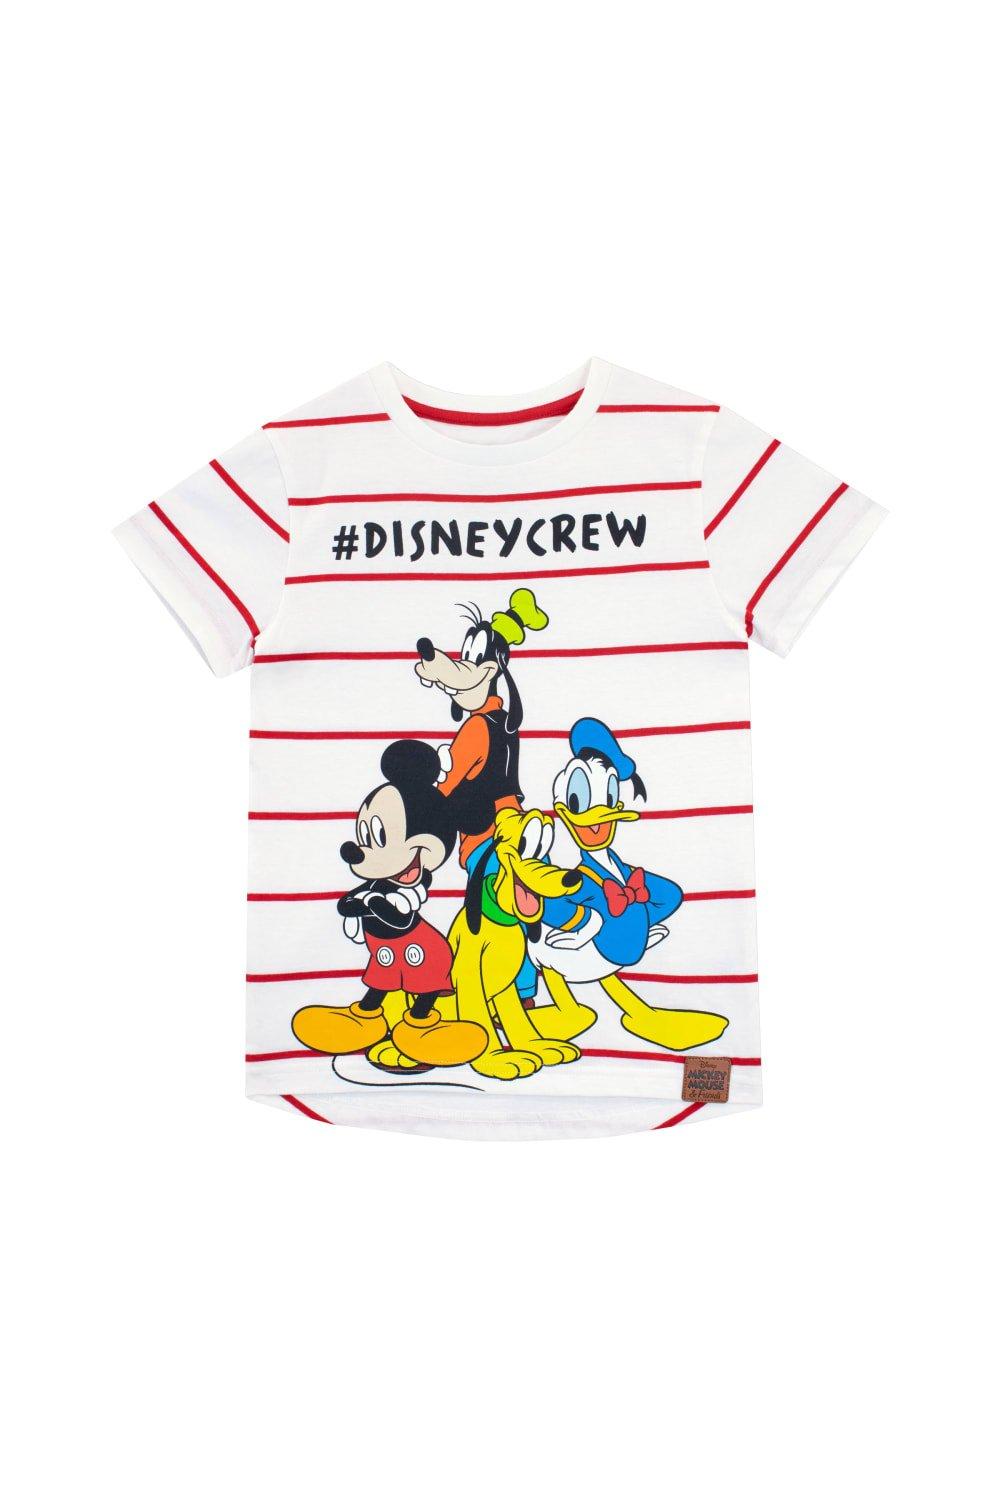 Donald Duck Pluto Goofy And Mickey Mouse T-Shirt